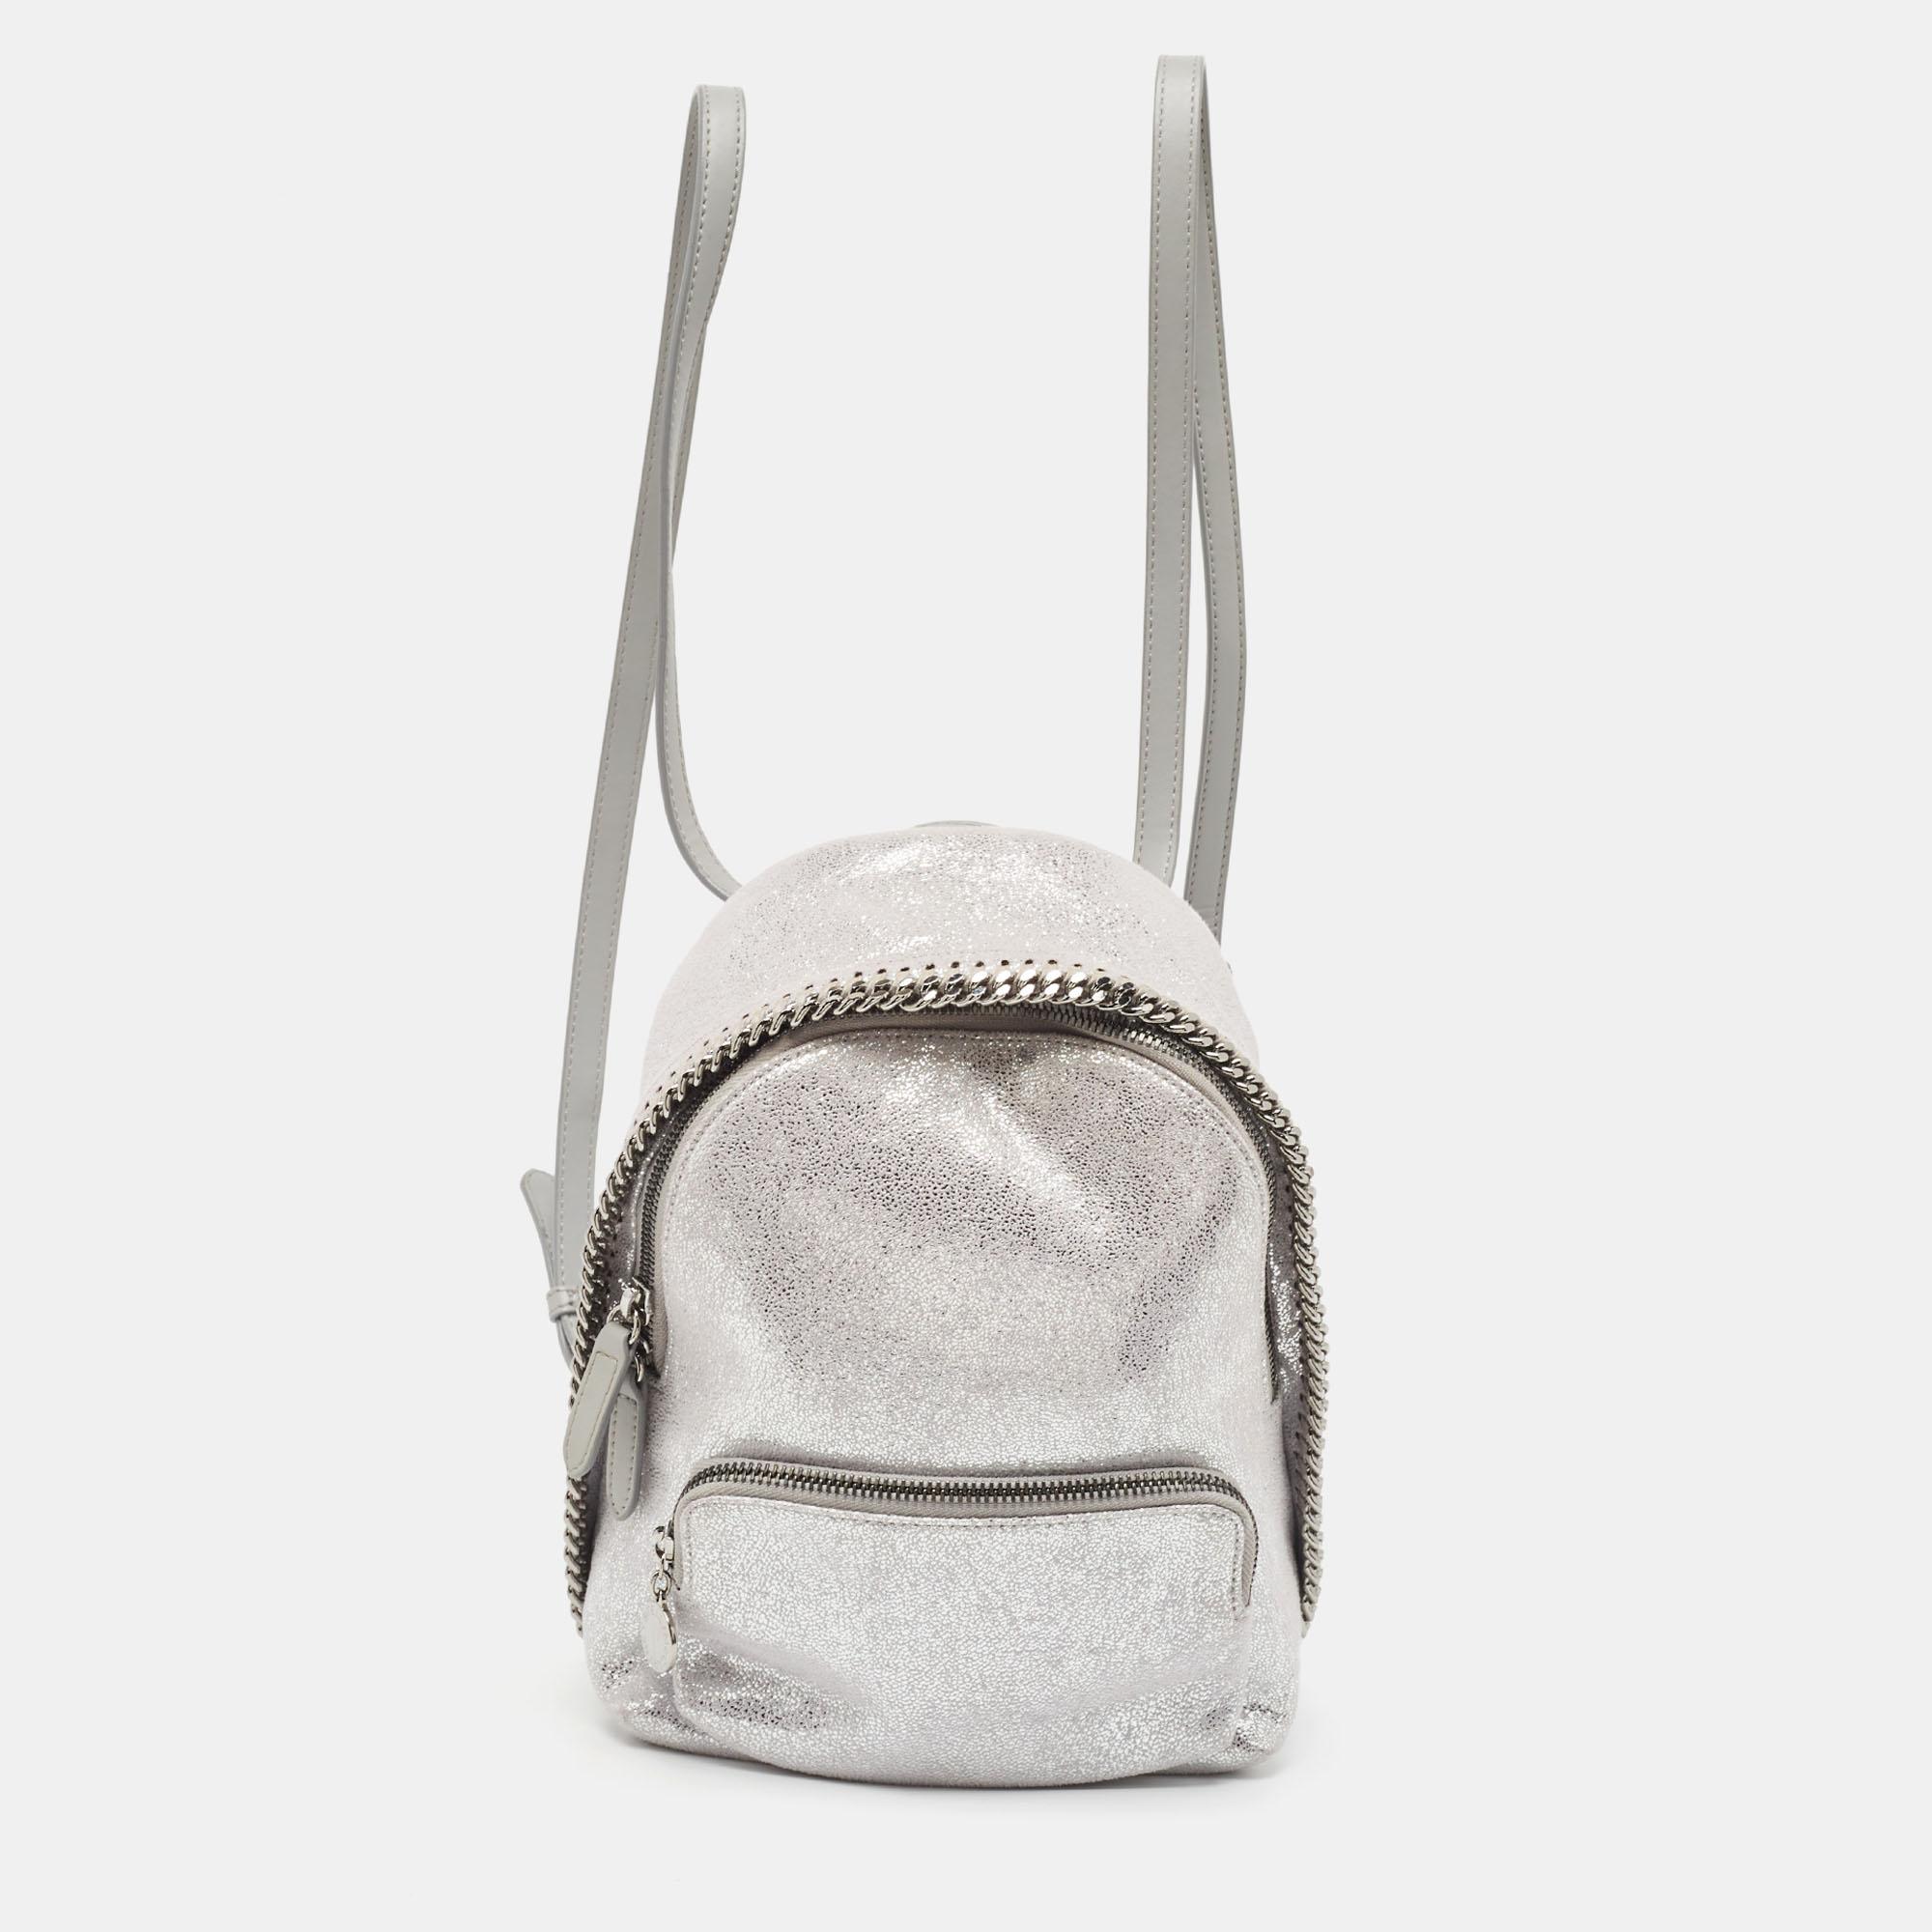 Crafted from quality materials your wardrobe is missing out on this designer backpack. Look your fashionable best in any outfit with this stylish backpack that promises to elevate your ensemble.